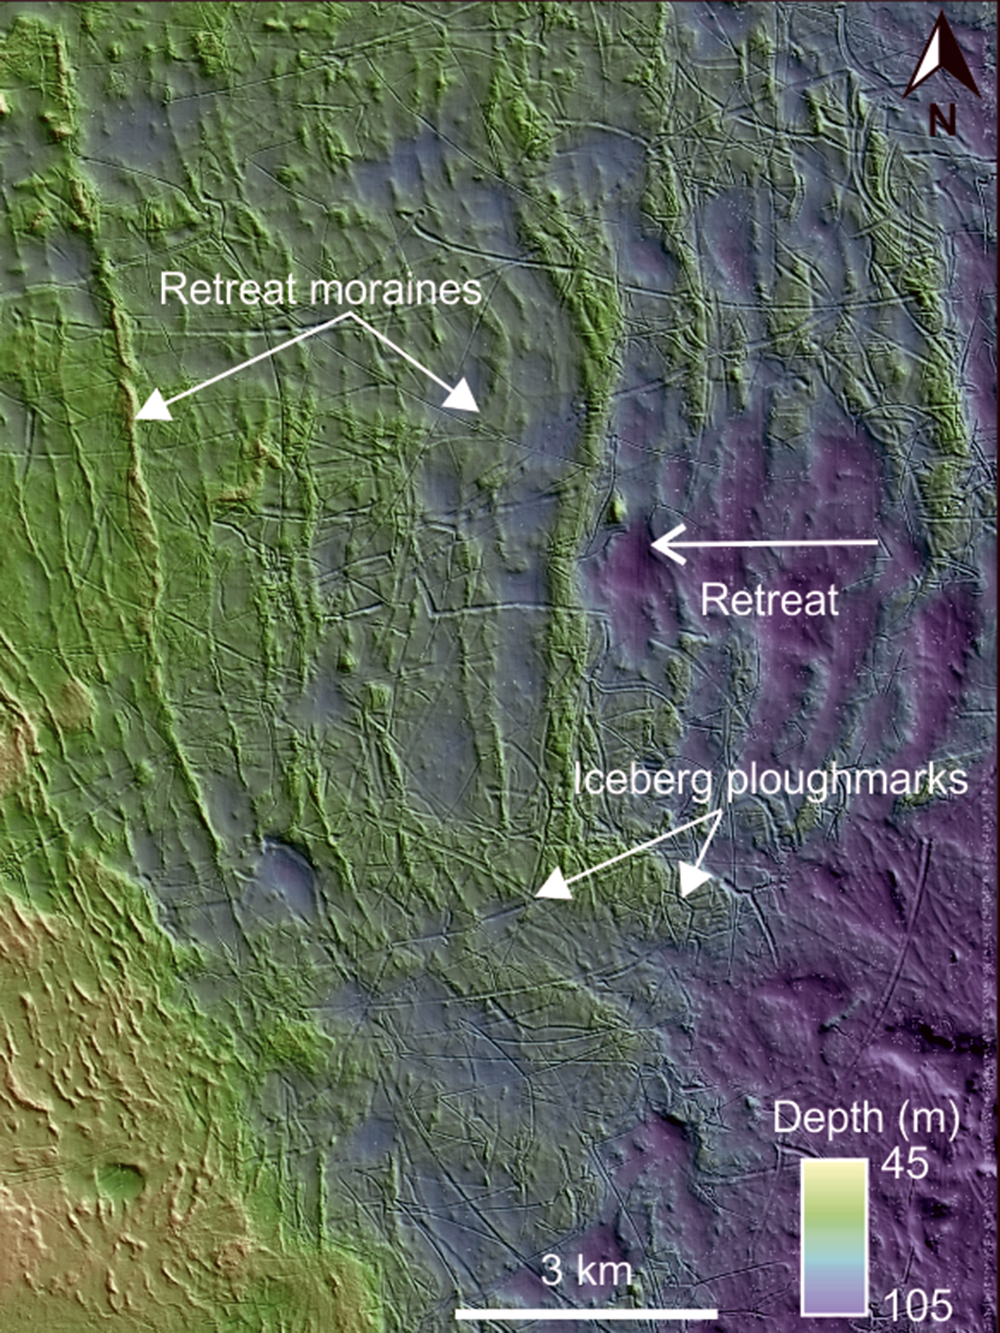 Figure 2: Shaded bathymetry map of a central area on Spitsbergenbanken showing retreat moraines and iceberg ploughmarks. White arrow indicates the direction of ice front retreat. In this area of the bank, the moraine ridges are oriented north to south, indicating that the ice front retreated towards west. The iceberg ploughmarks show no preferred orientation. 